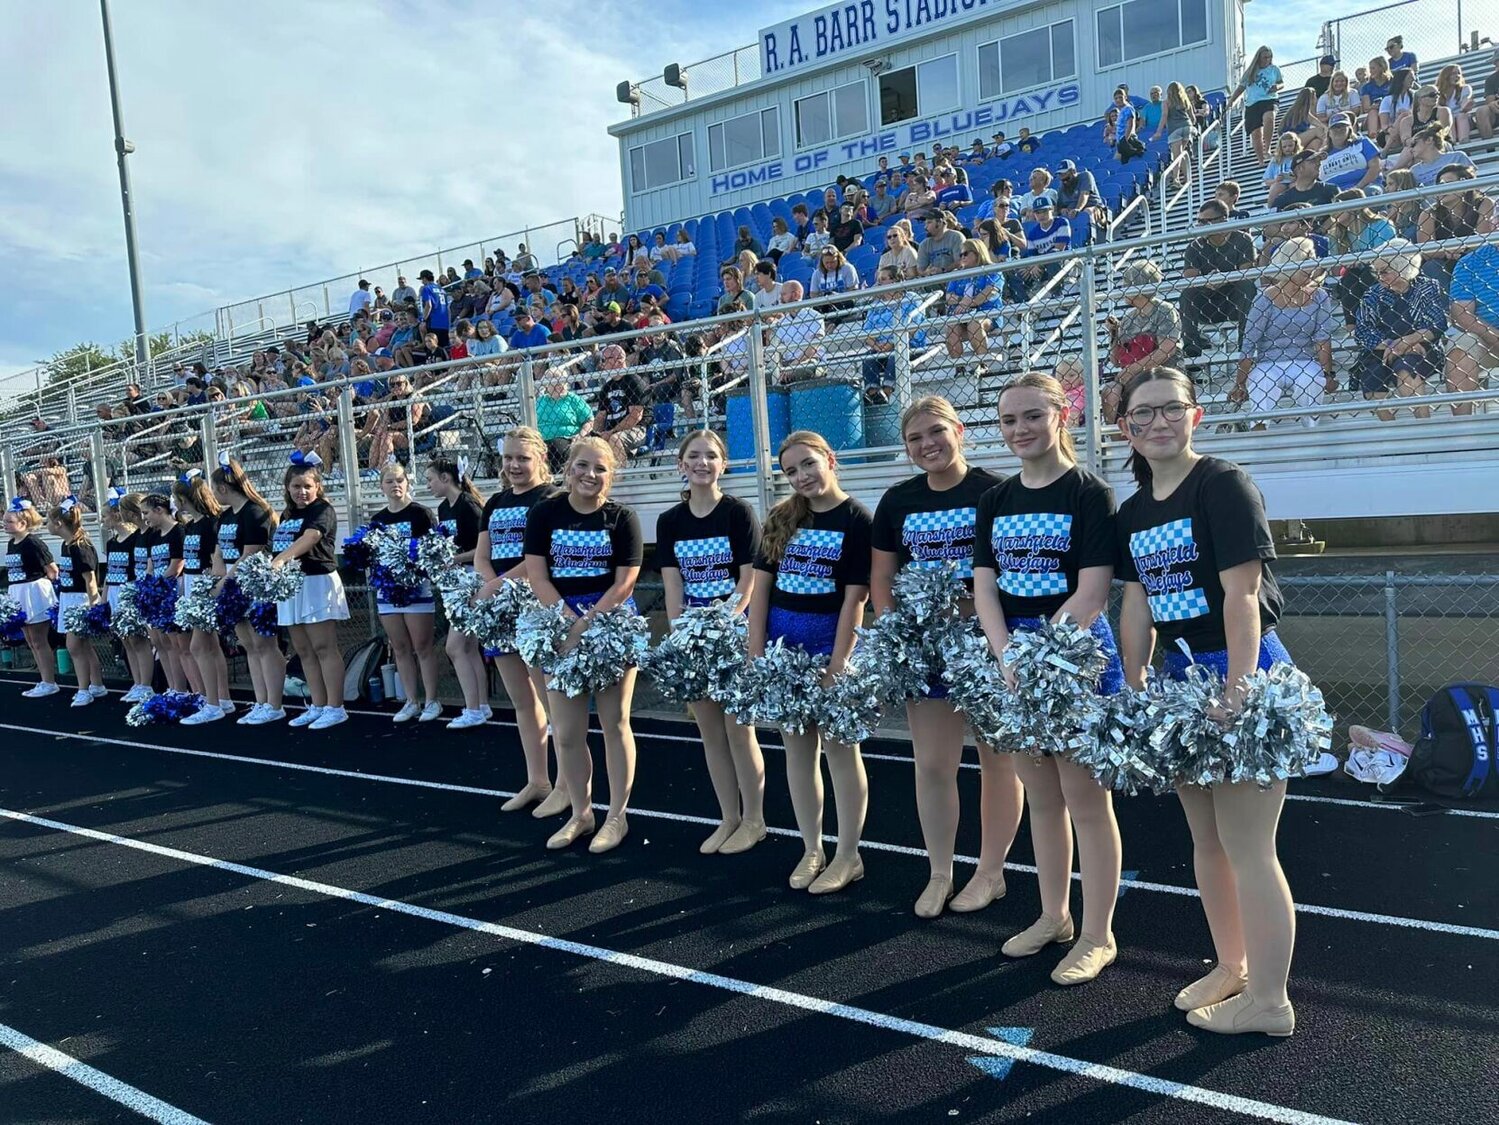 The Bluejays Cheer Team in front of fans at R.A. Barr. 